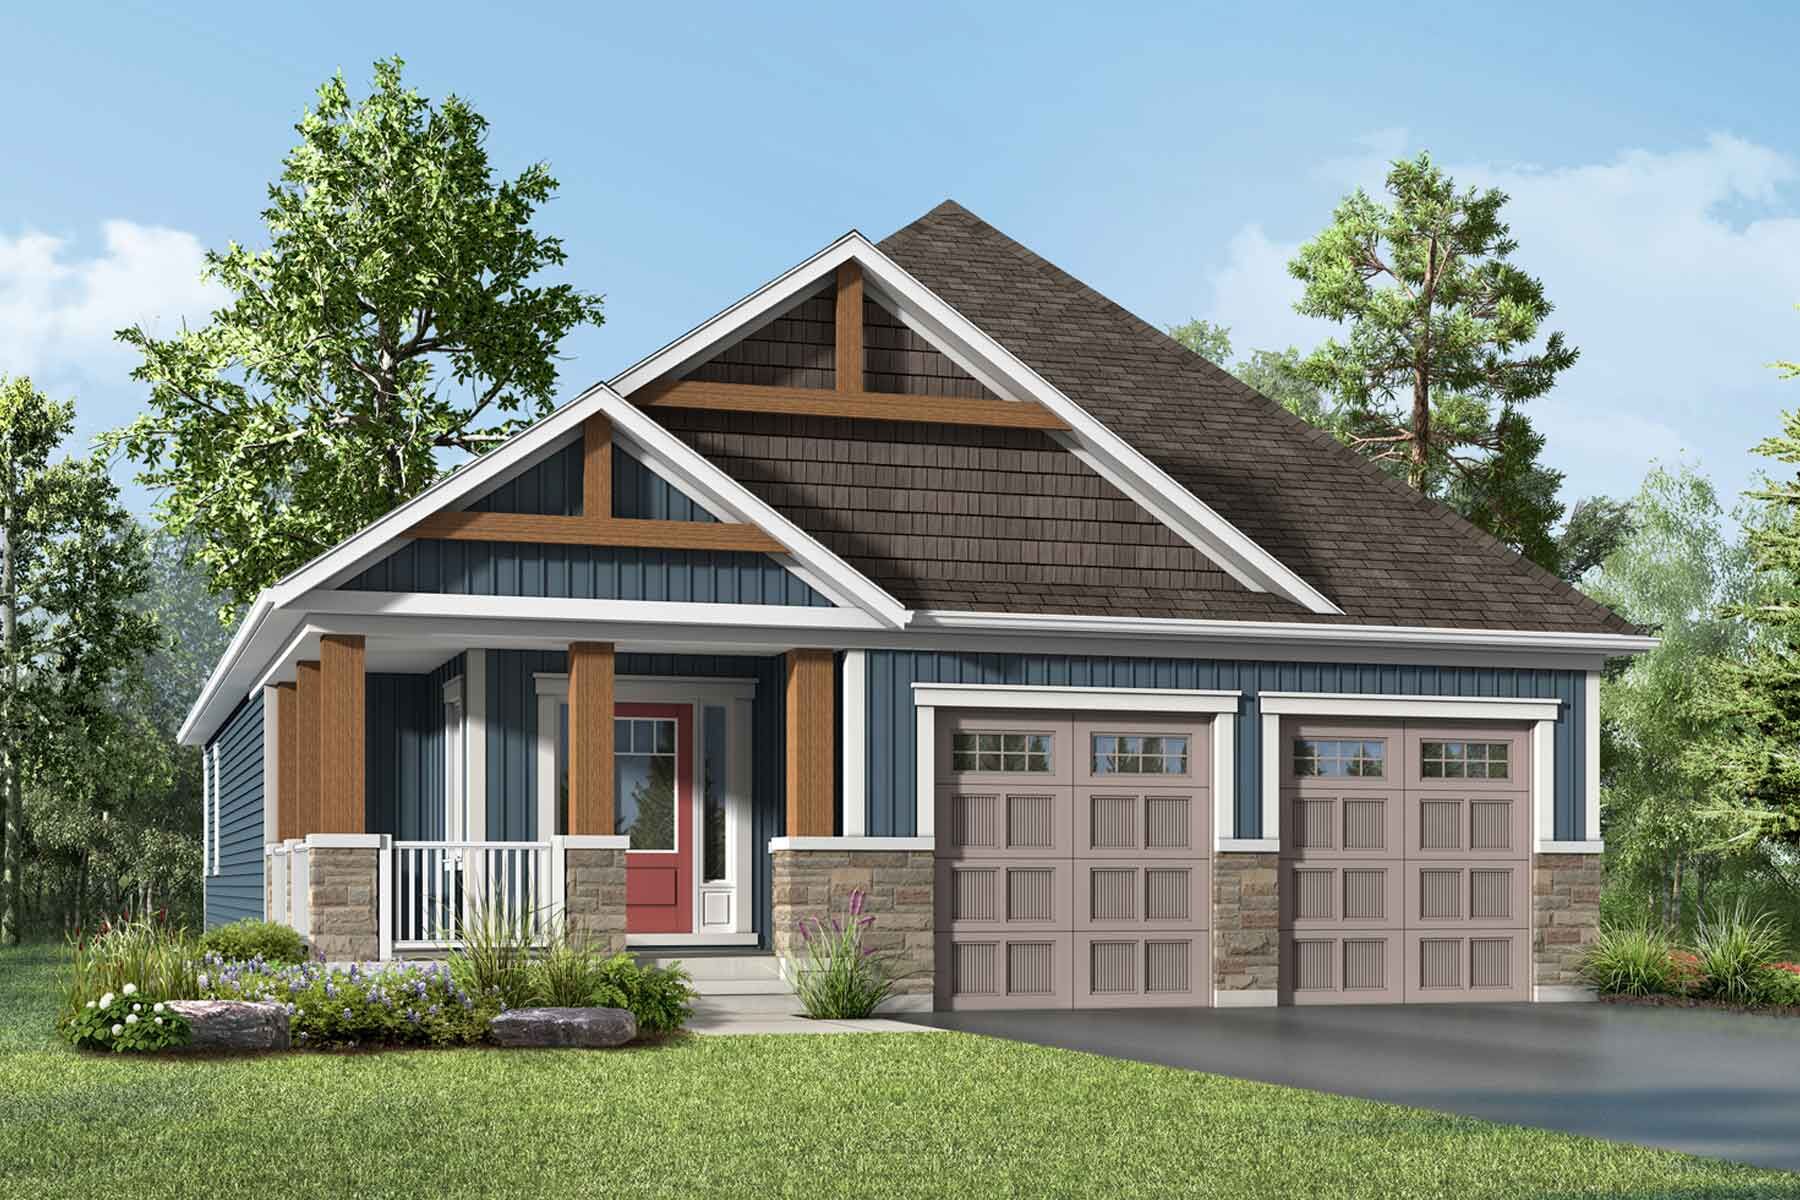 A muskoka style elevation with double car garage and brown and blue siding. 